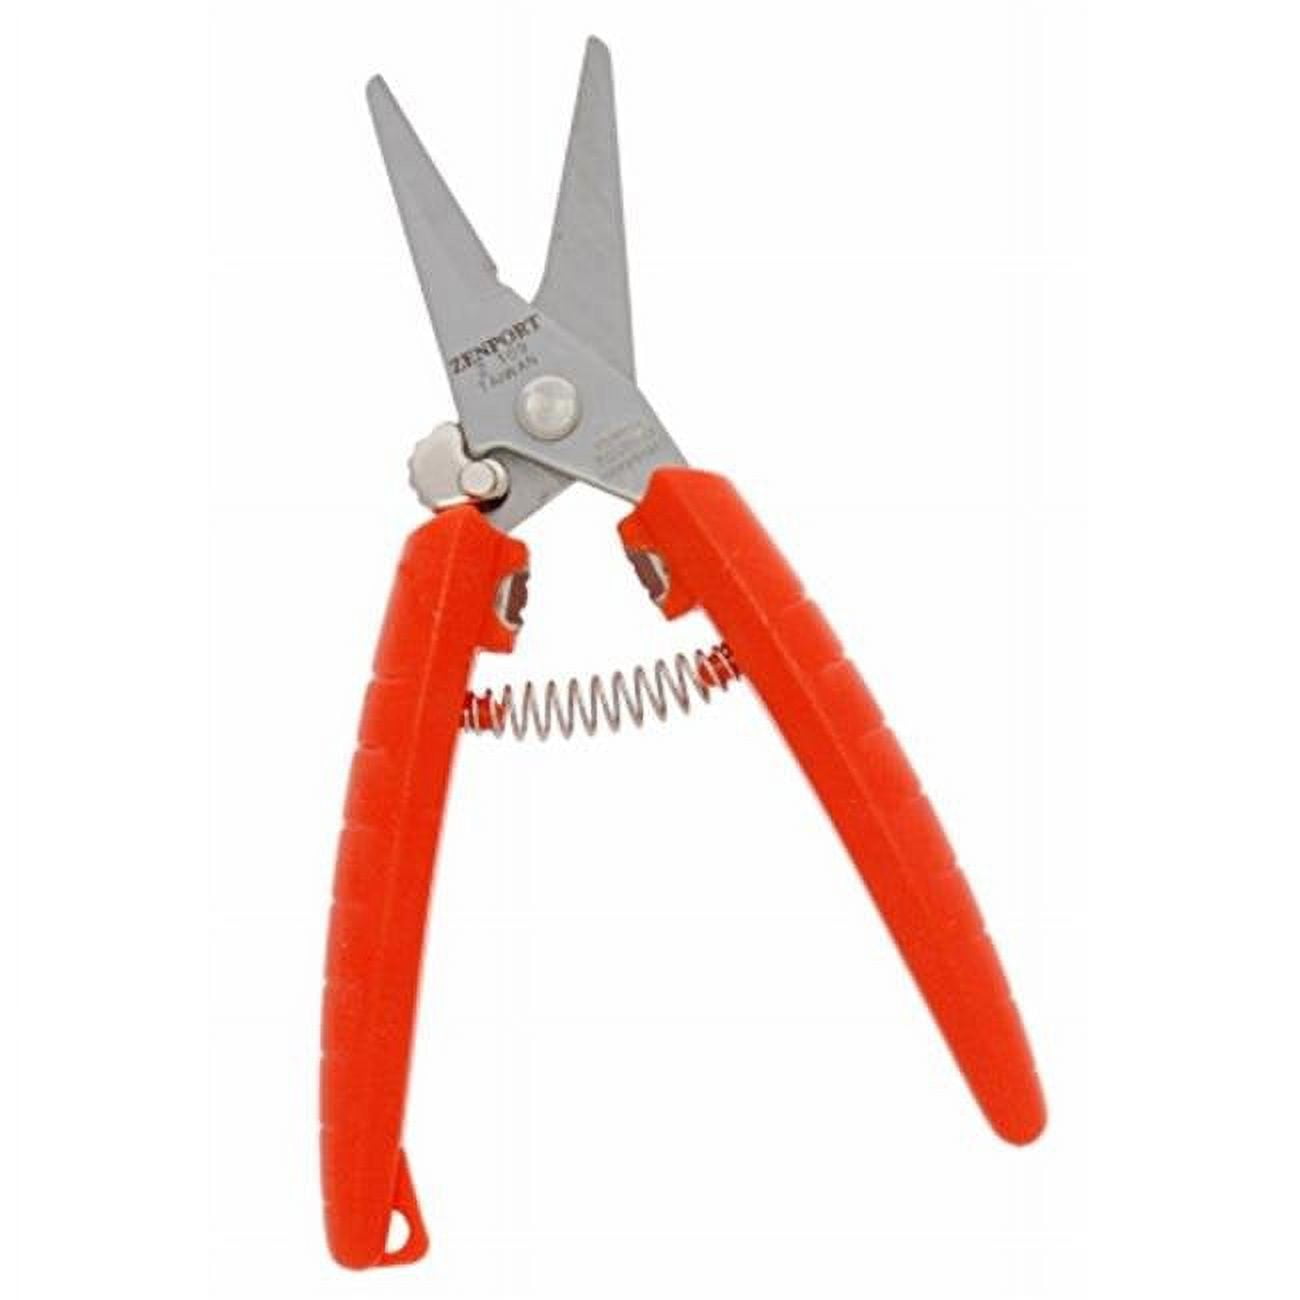 Zenport Z109 Stainless Floral Bunch Cutter Shears Serrated Blade 10-in